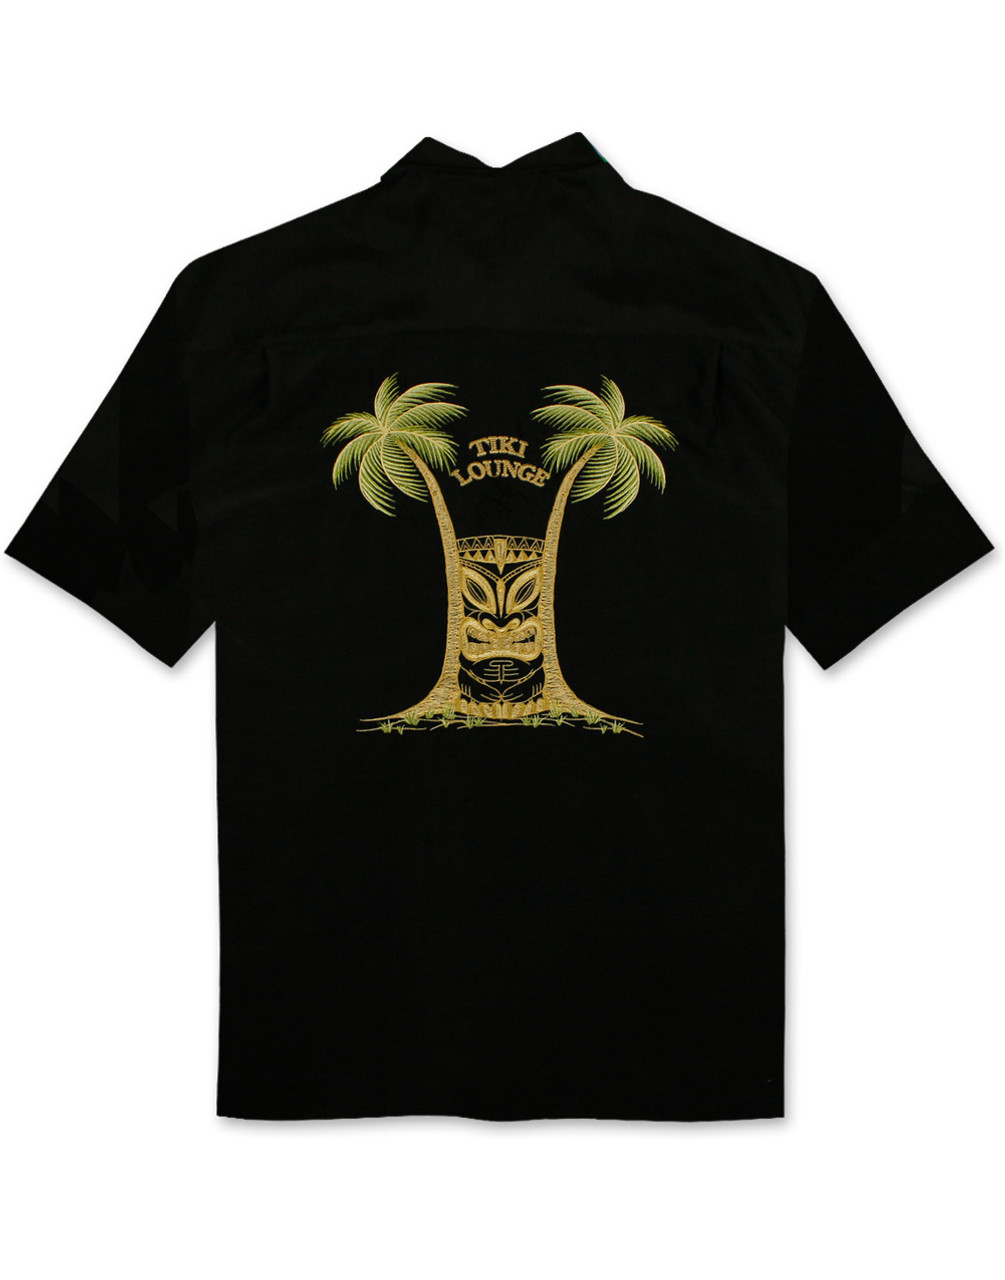 Tiki Lounge Embroidered Polynosic Camp Shirt by Bamboo Cay - WB1952 Black